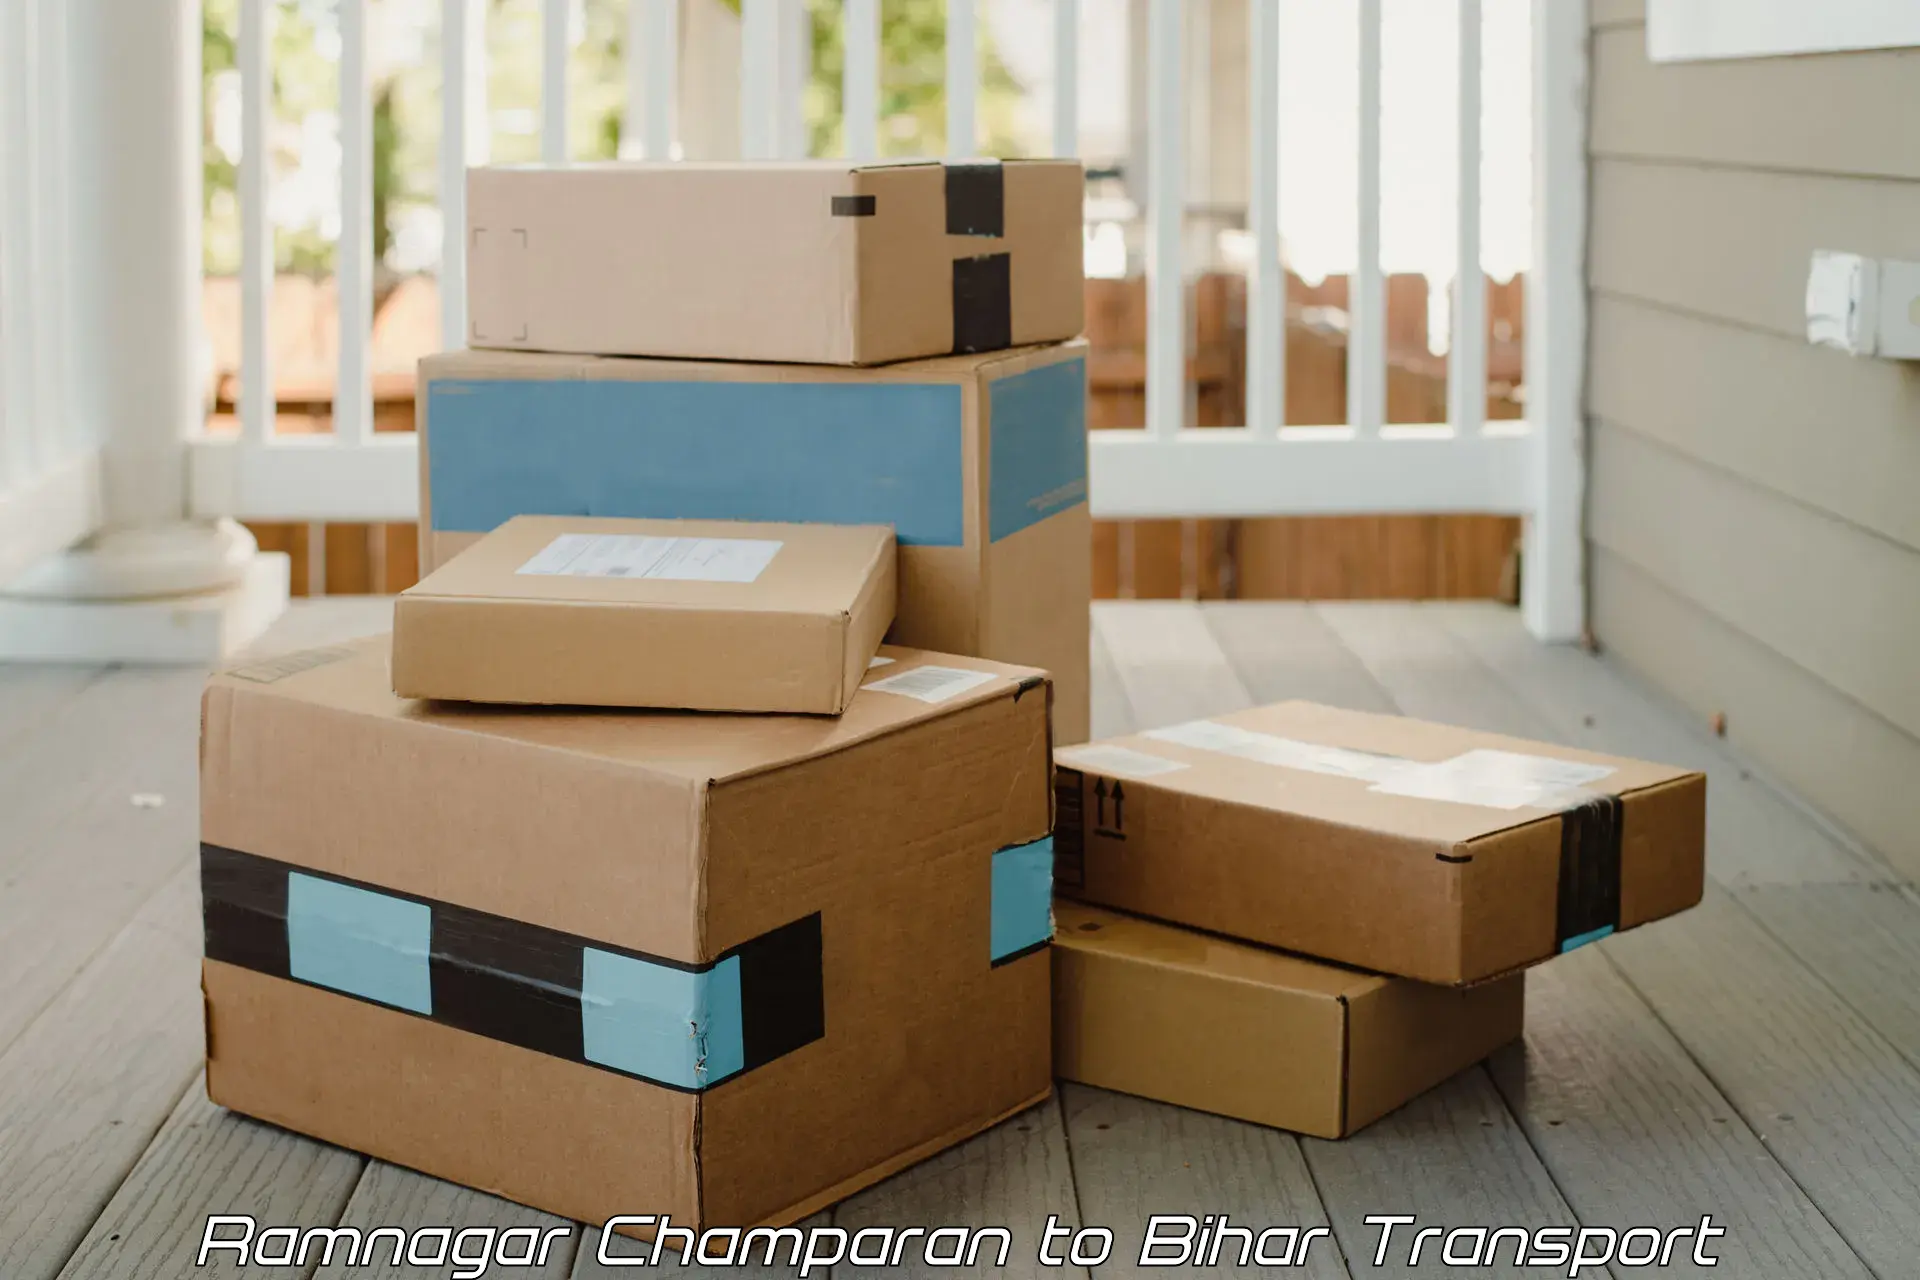 Package delivery services Ramnagar Champaran to Maheshkhunt